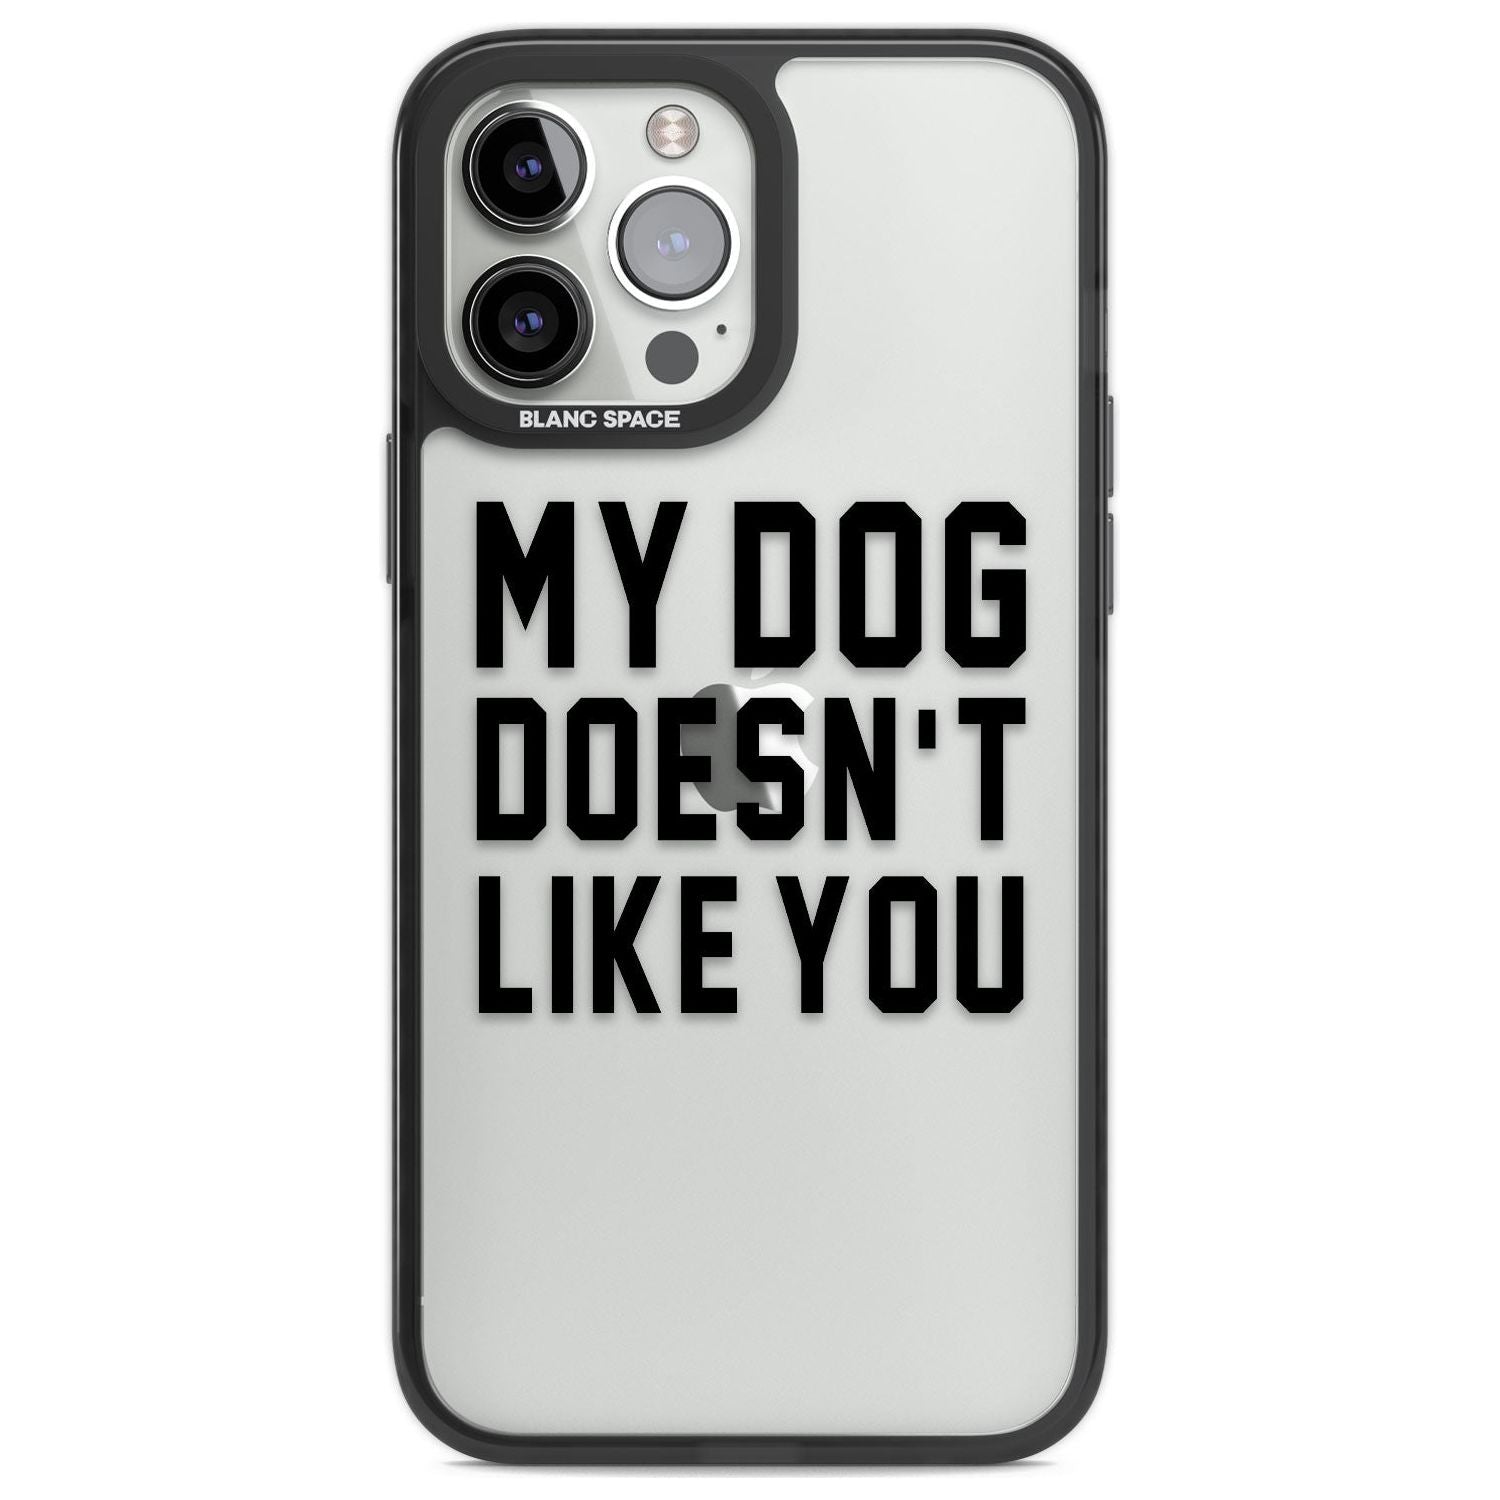 Dog Doesn't Like You Phone Case iPhone 13 Pro Max / Black Impact Case,iPhone 14 Pro Max / Black Impact Case Blanc Space